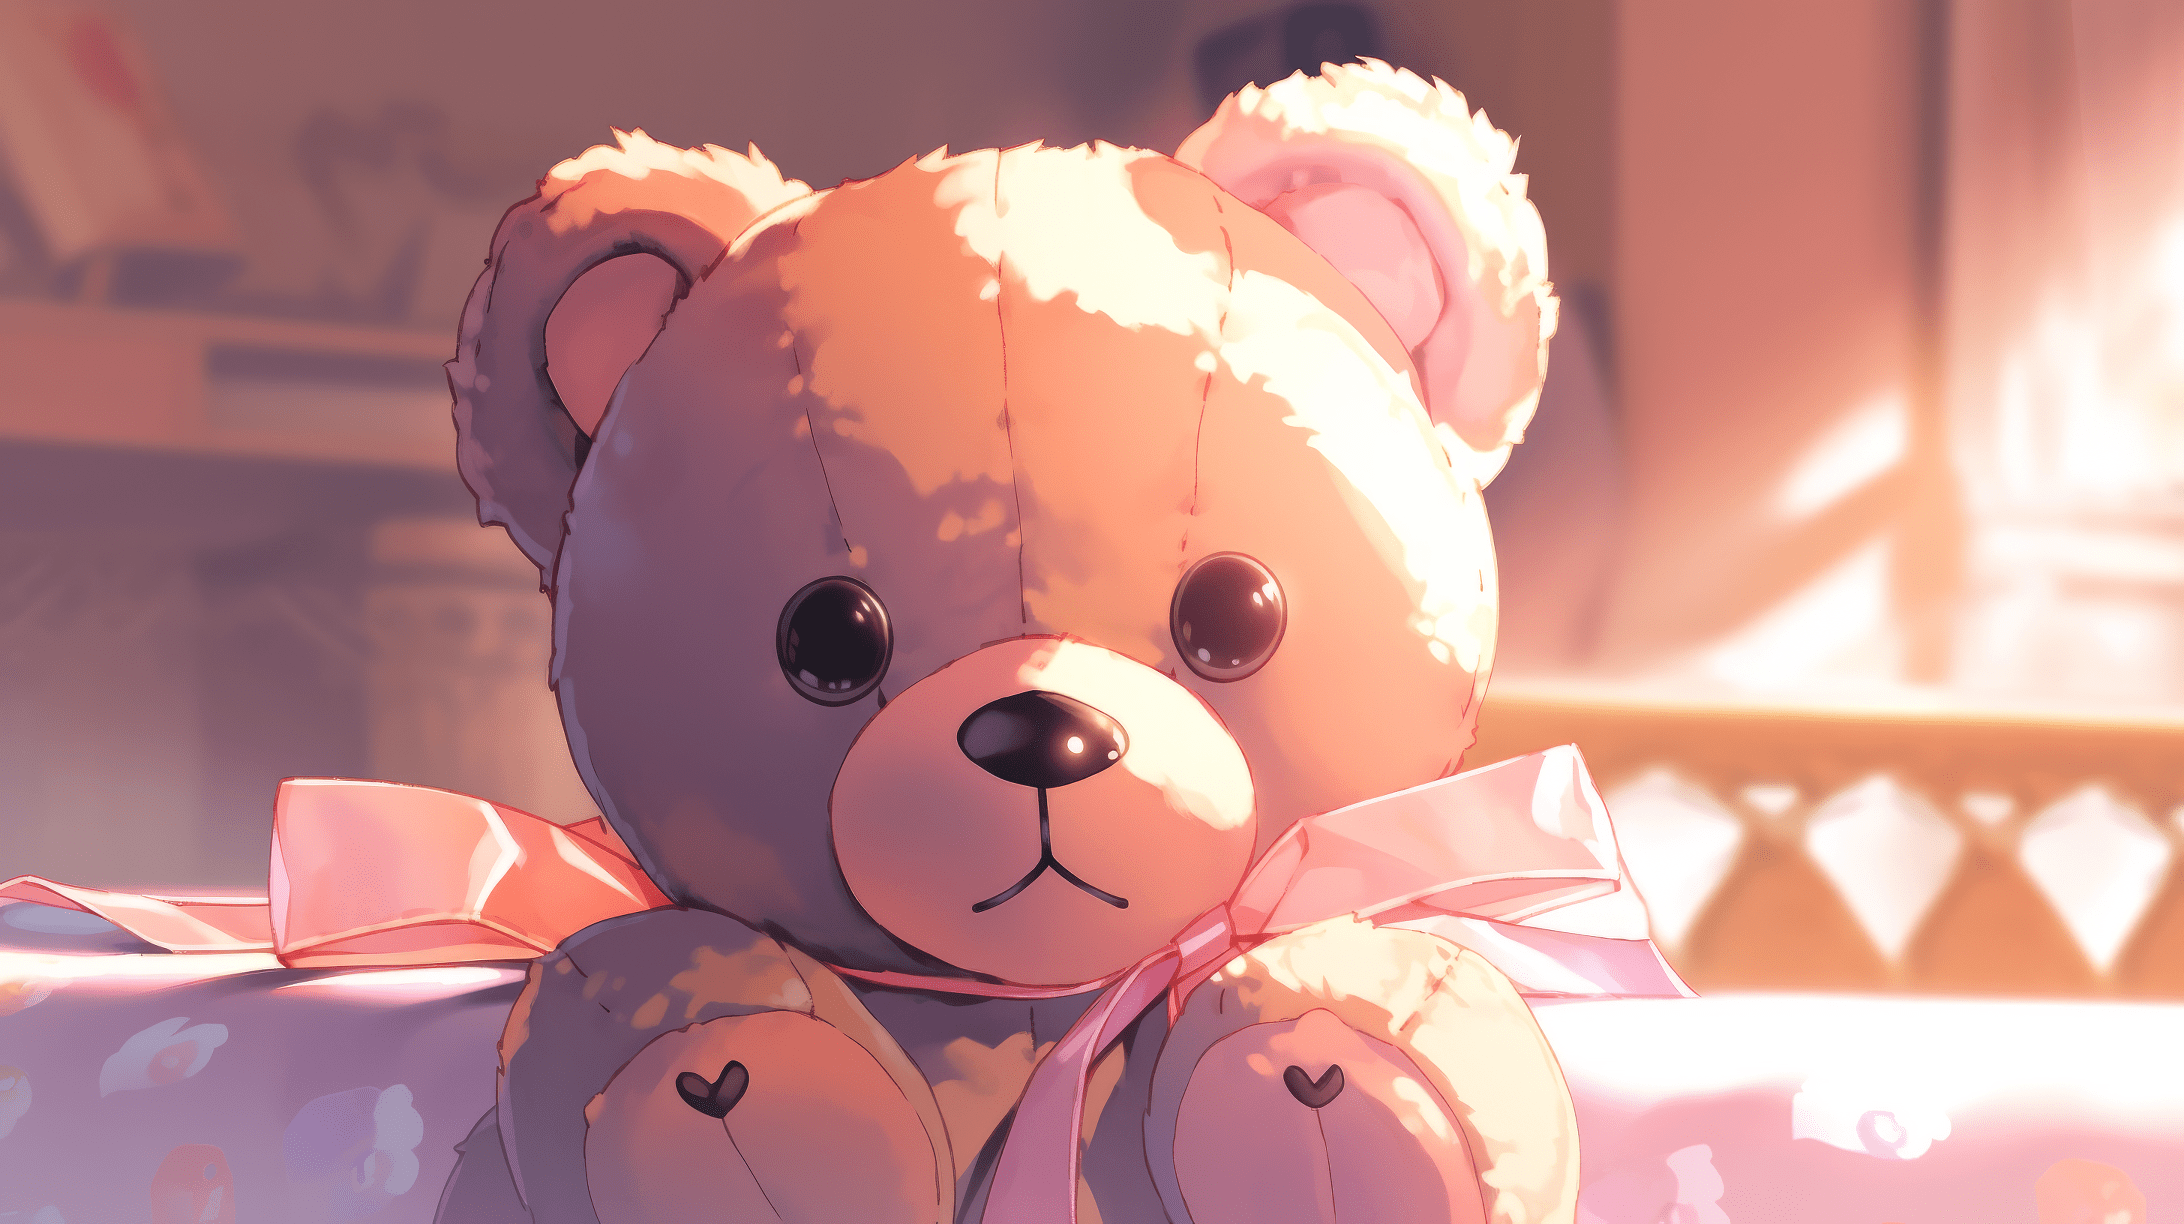 Teddy Bear HD Wallpaper and Background